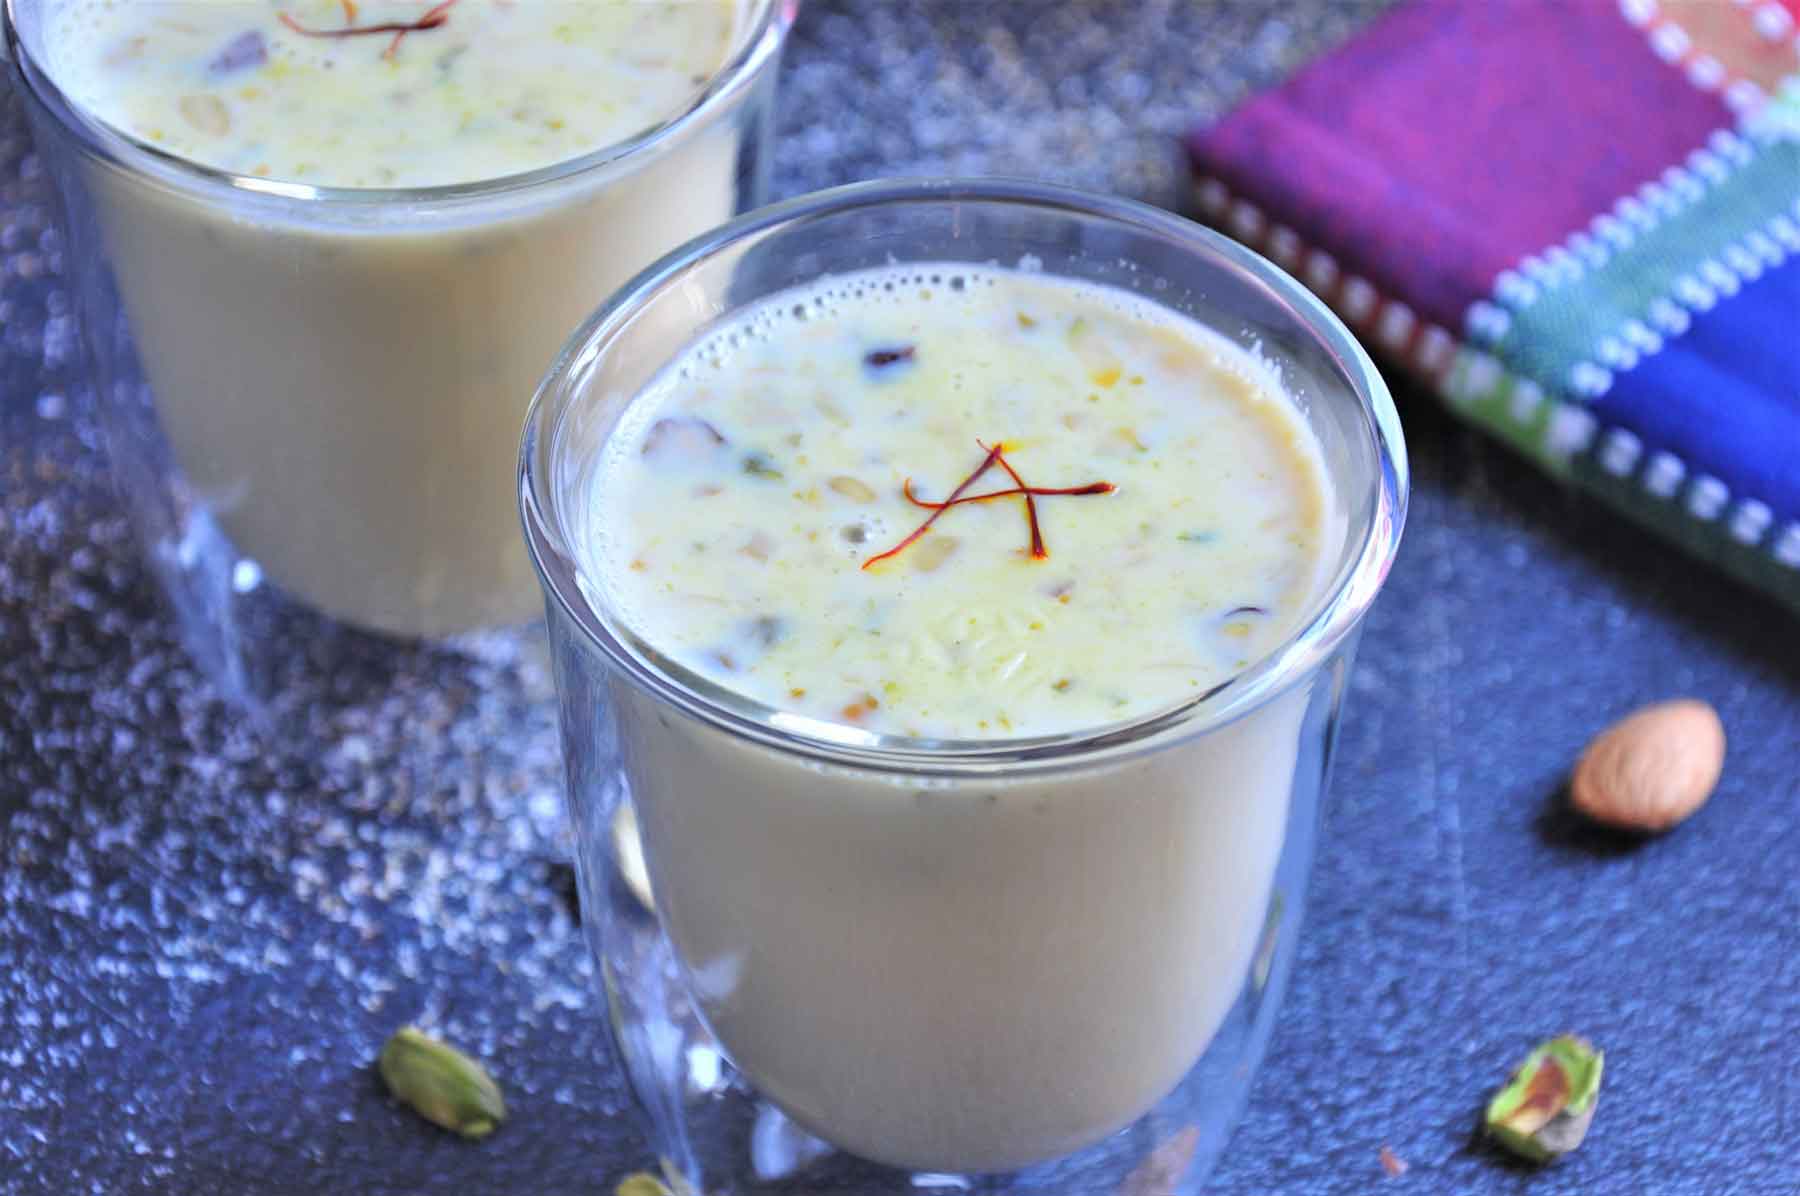 Sweet Almond milk in a glass, garnished with chopped nuts and saffron strands.